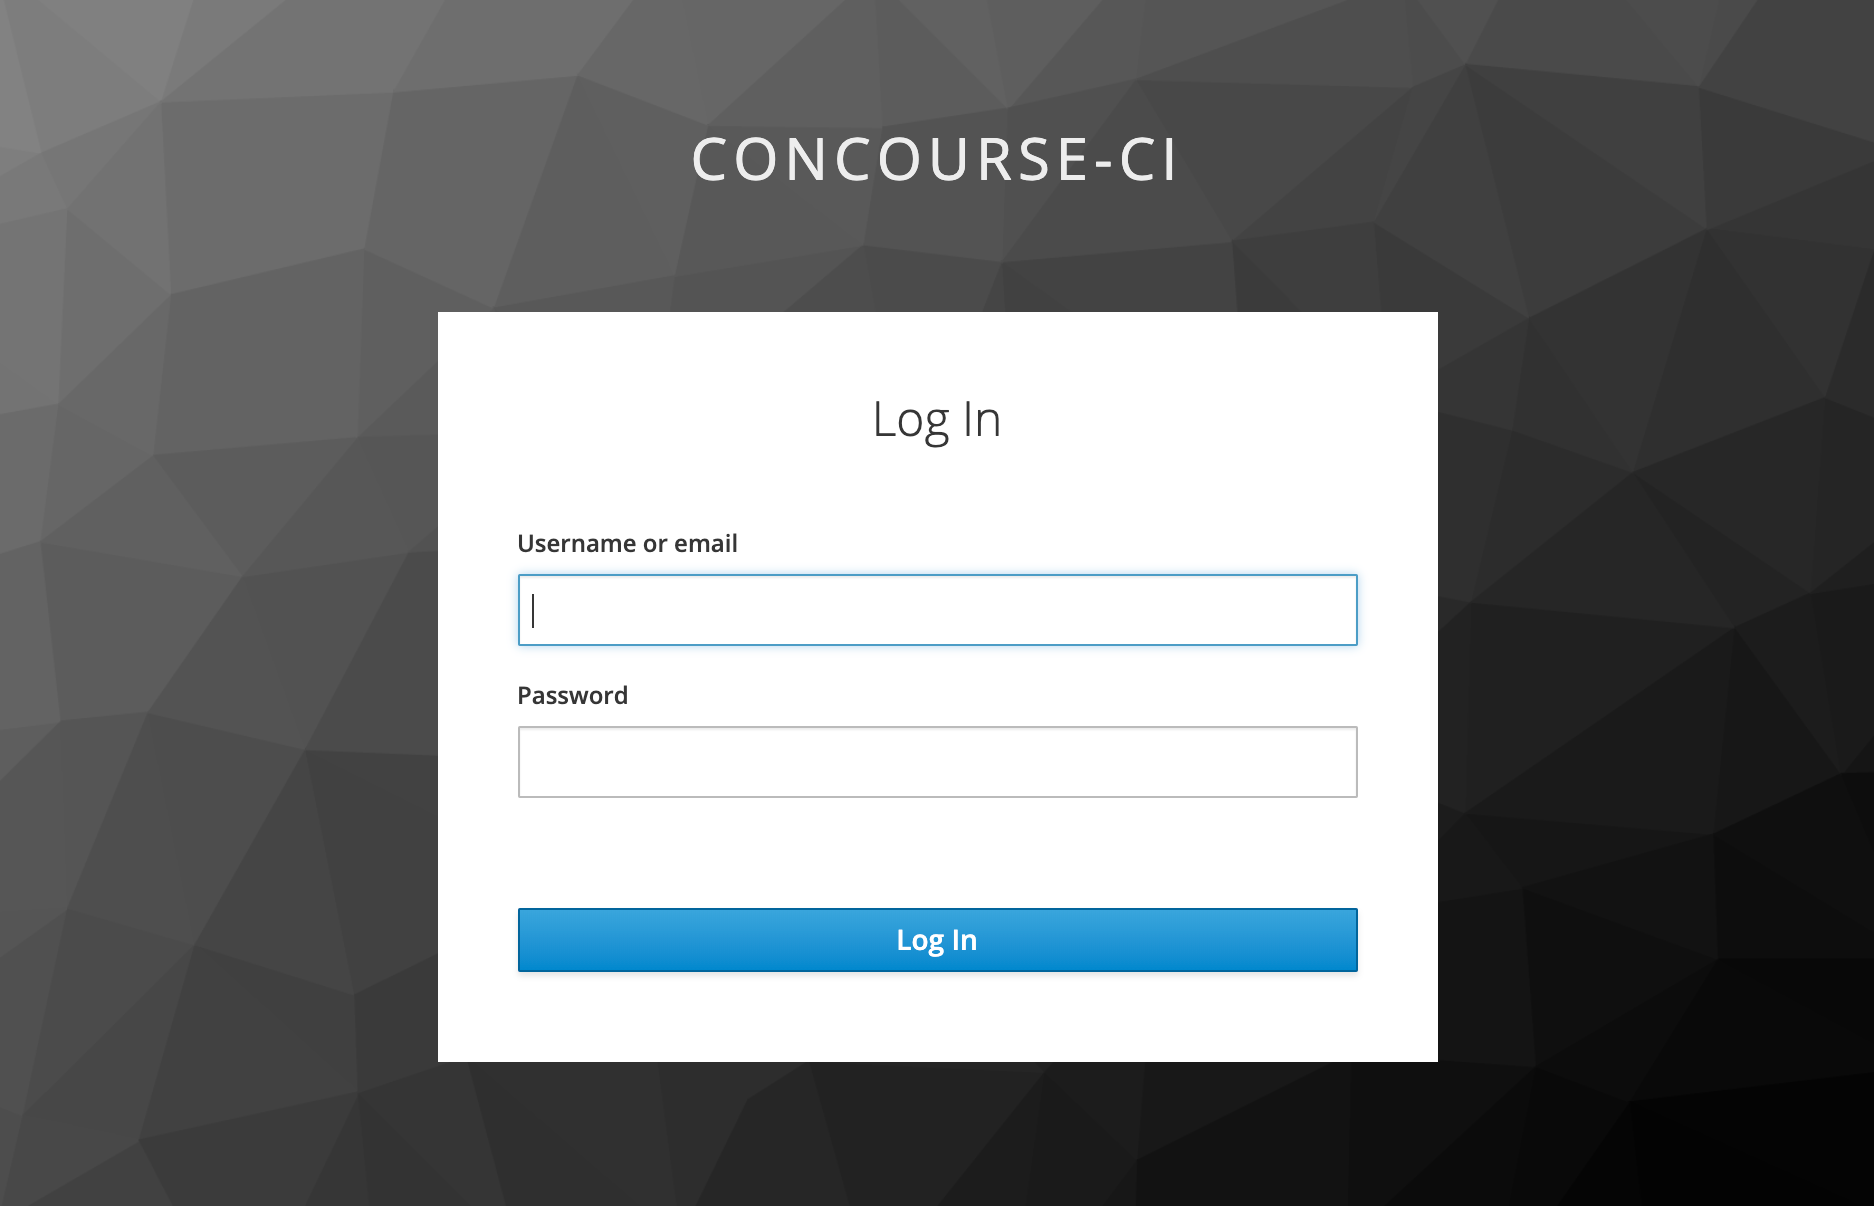 KeyCloak_Log in to concourse-ci.png